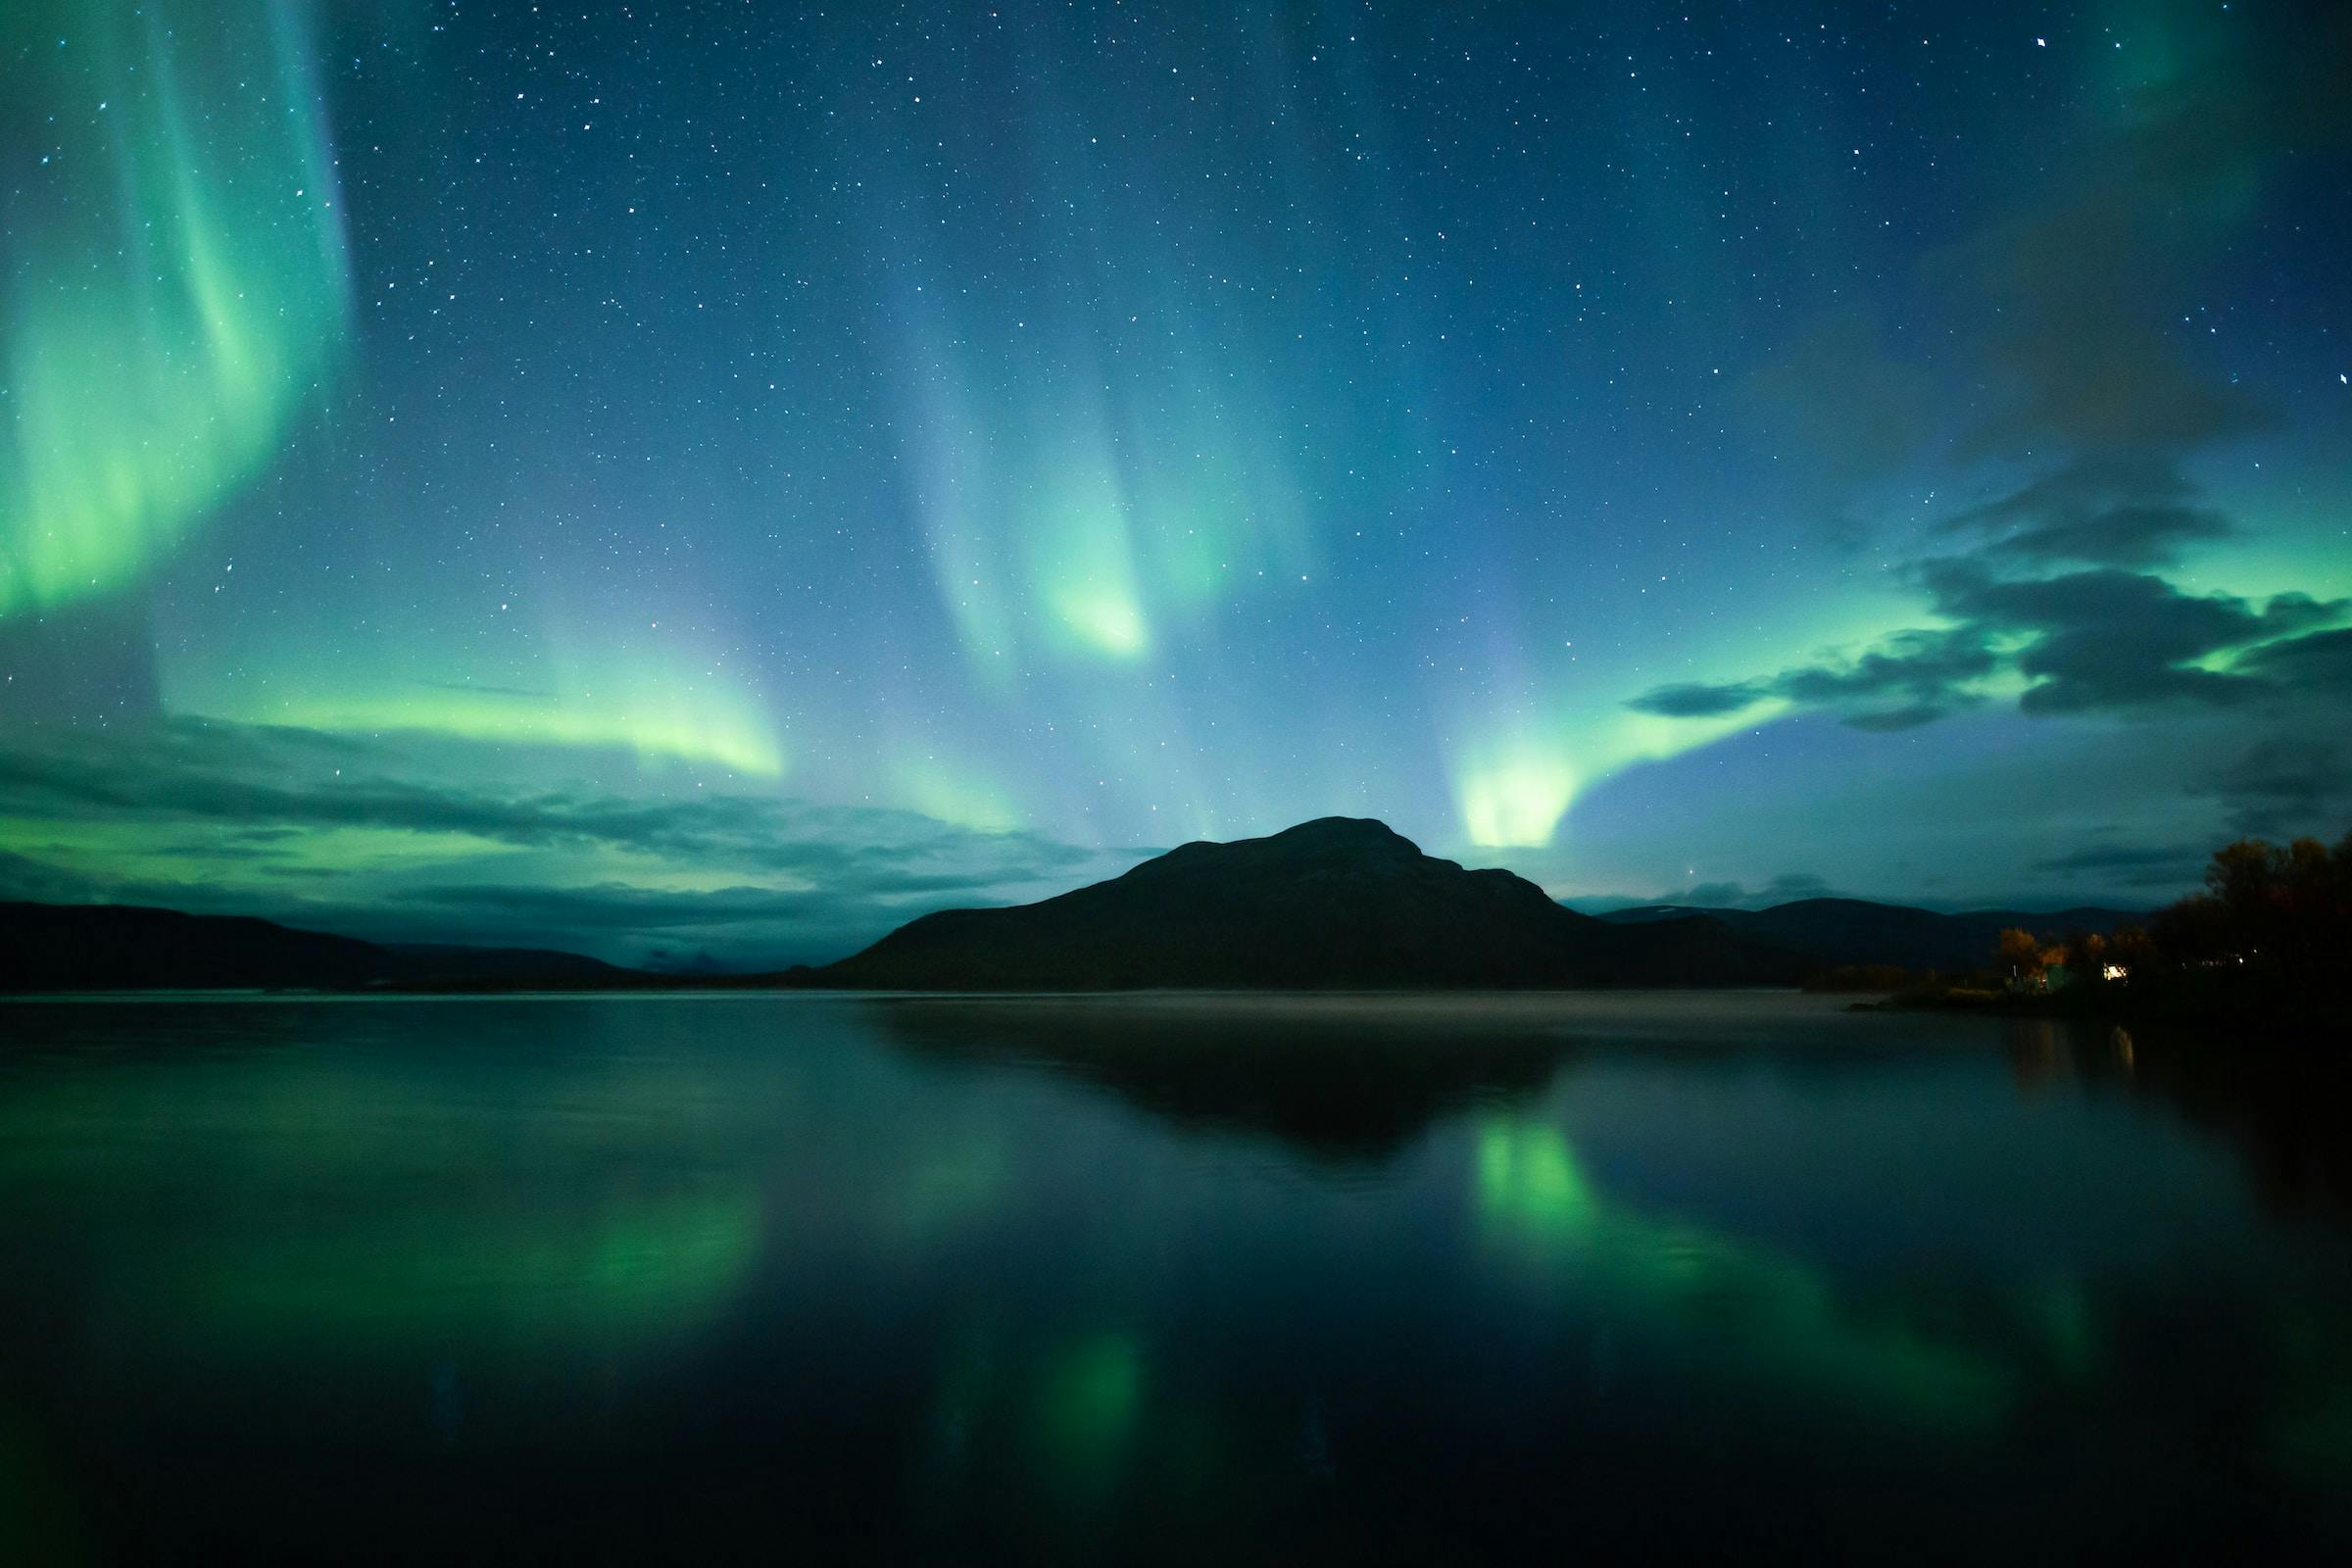 Cover image of the blog post. Photo of Aurora Borealis